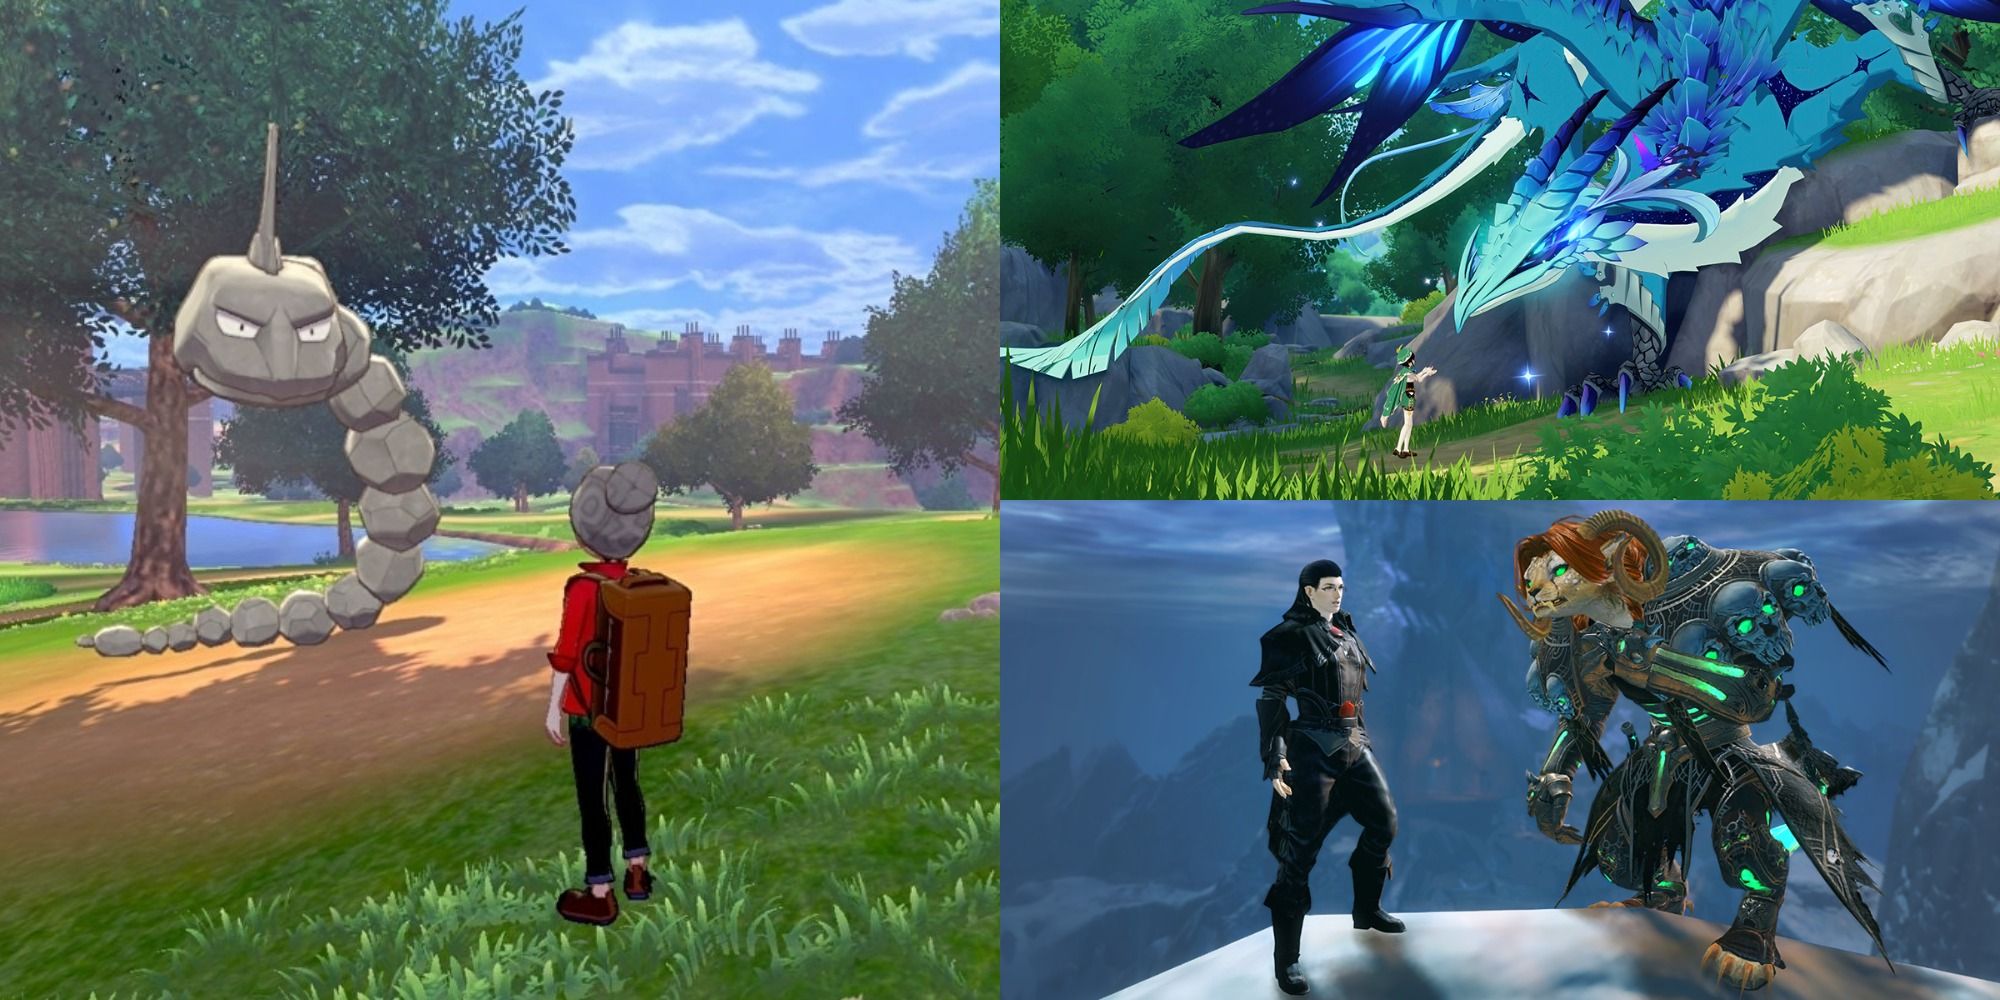 10 Best FreeToPlay Games For Fans Of The Pokémon Franchise